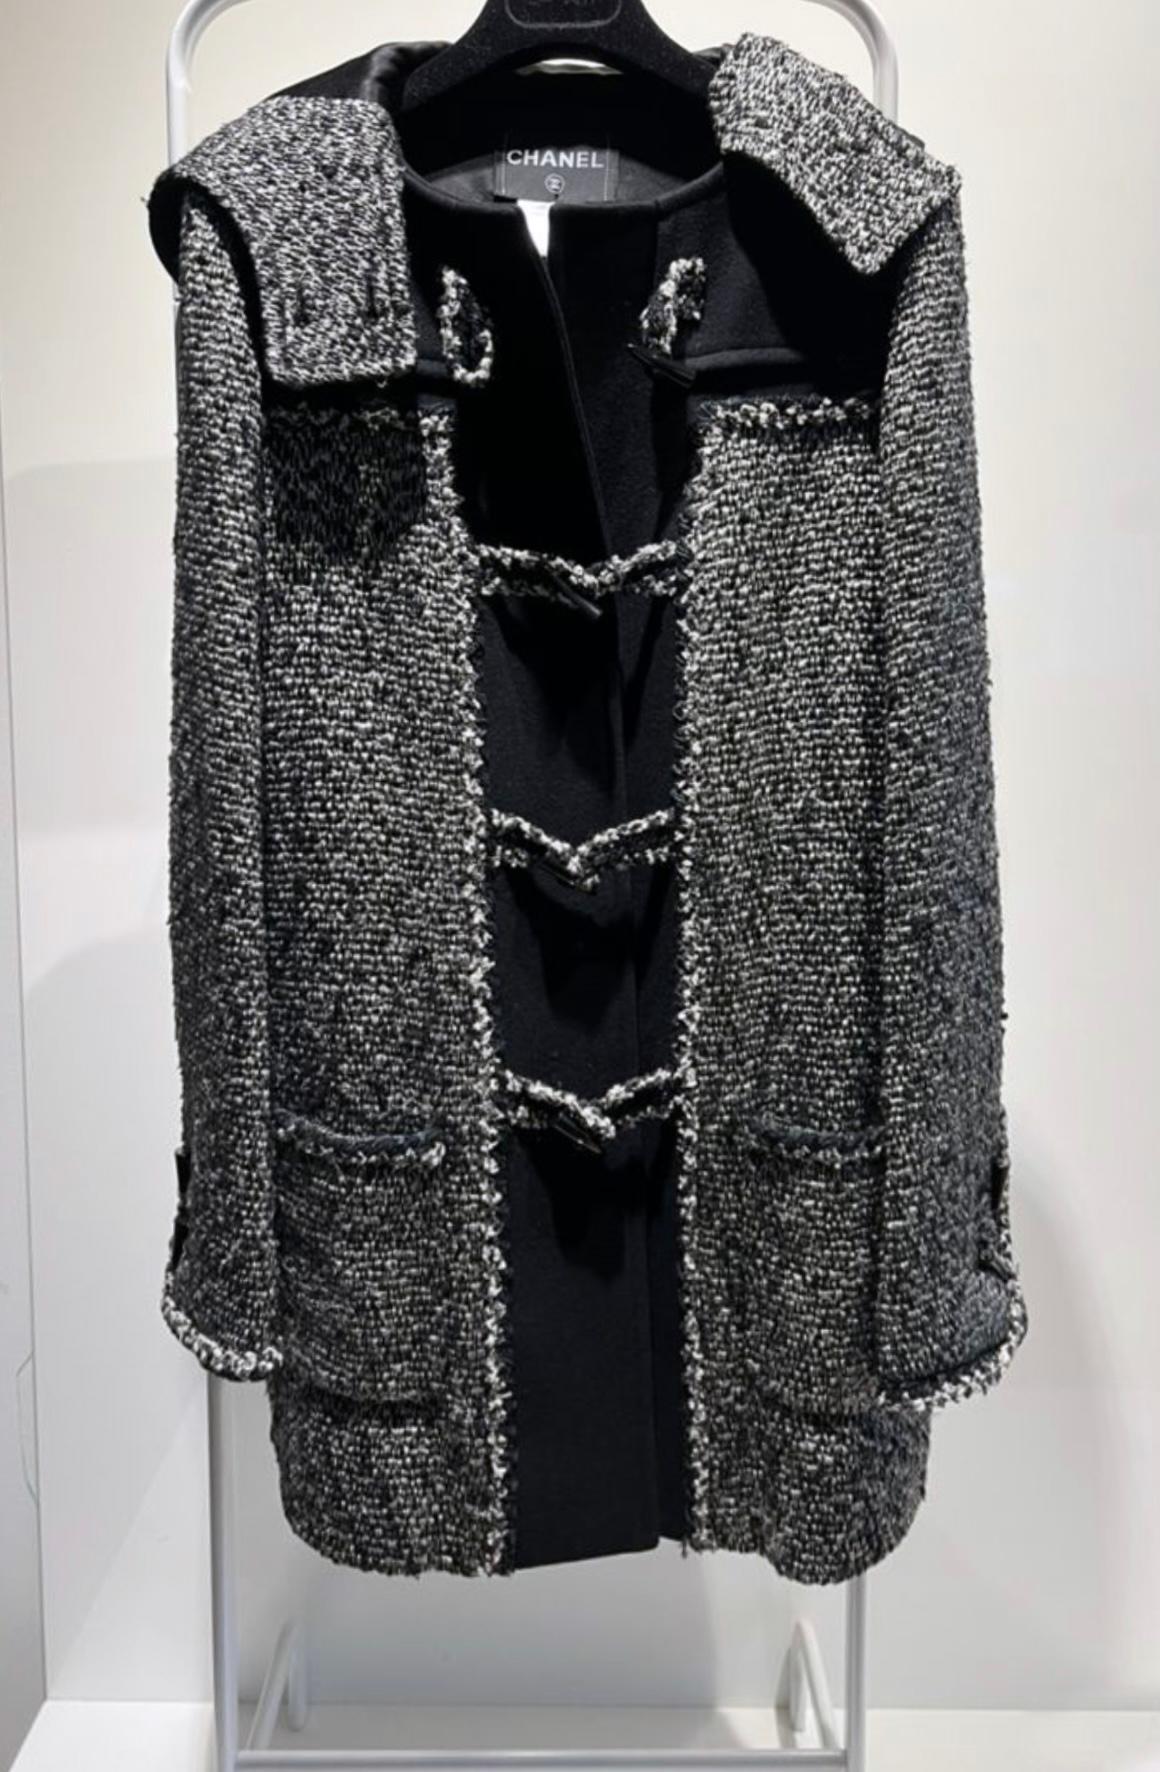 Chanel CC Closures Runway Tweed Parka Coat In Excellent Condition For Sale In Dubai, AE